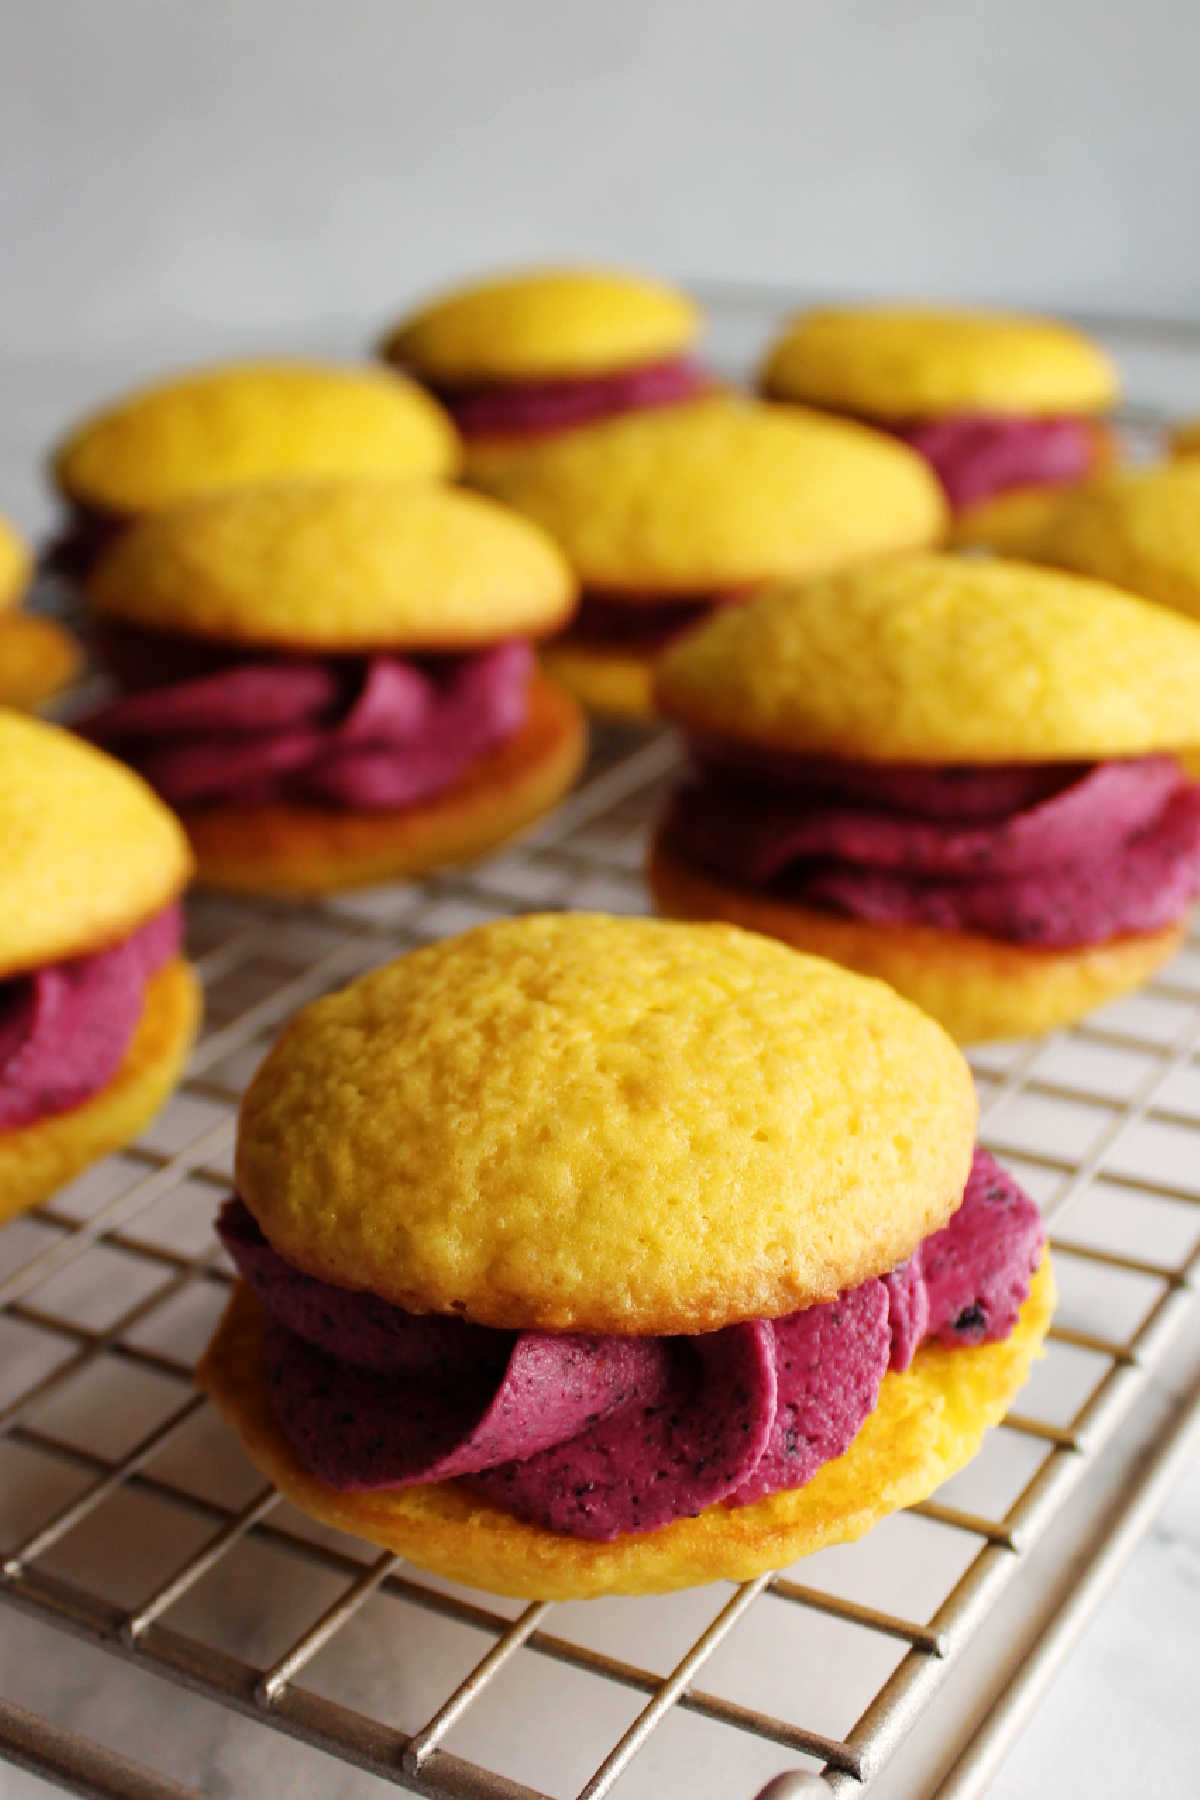 Yellow lemon whoopie pies with deep purple blueberry frosting piped between the layers.